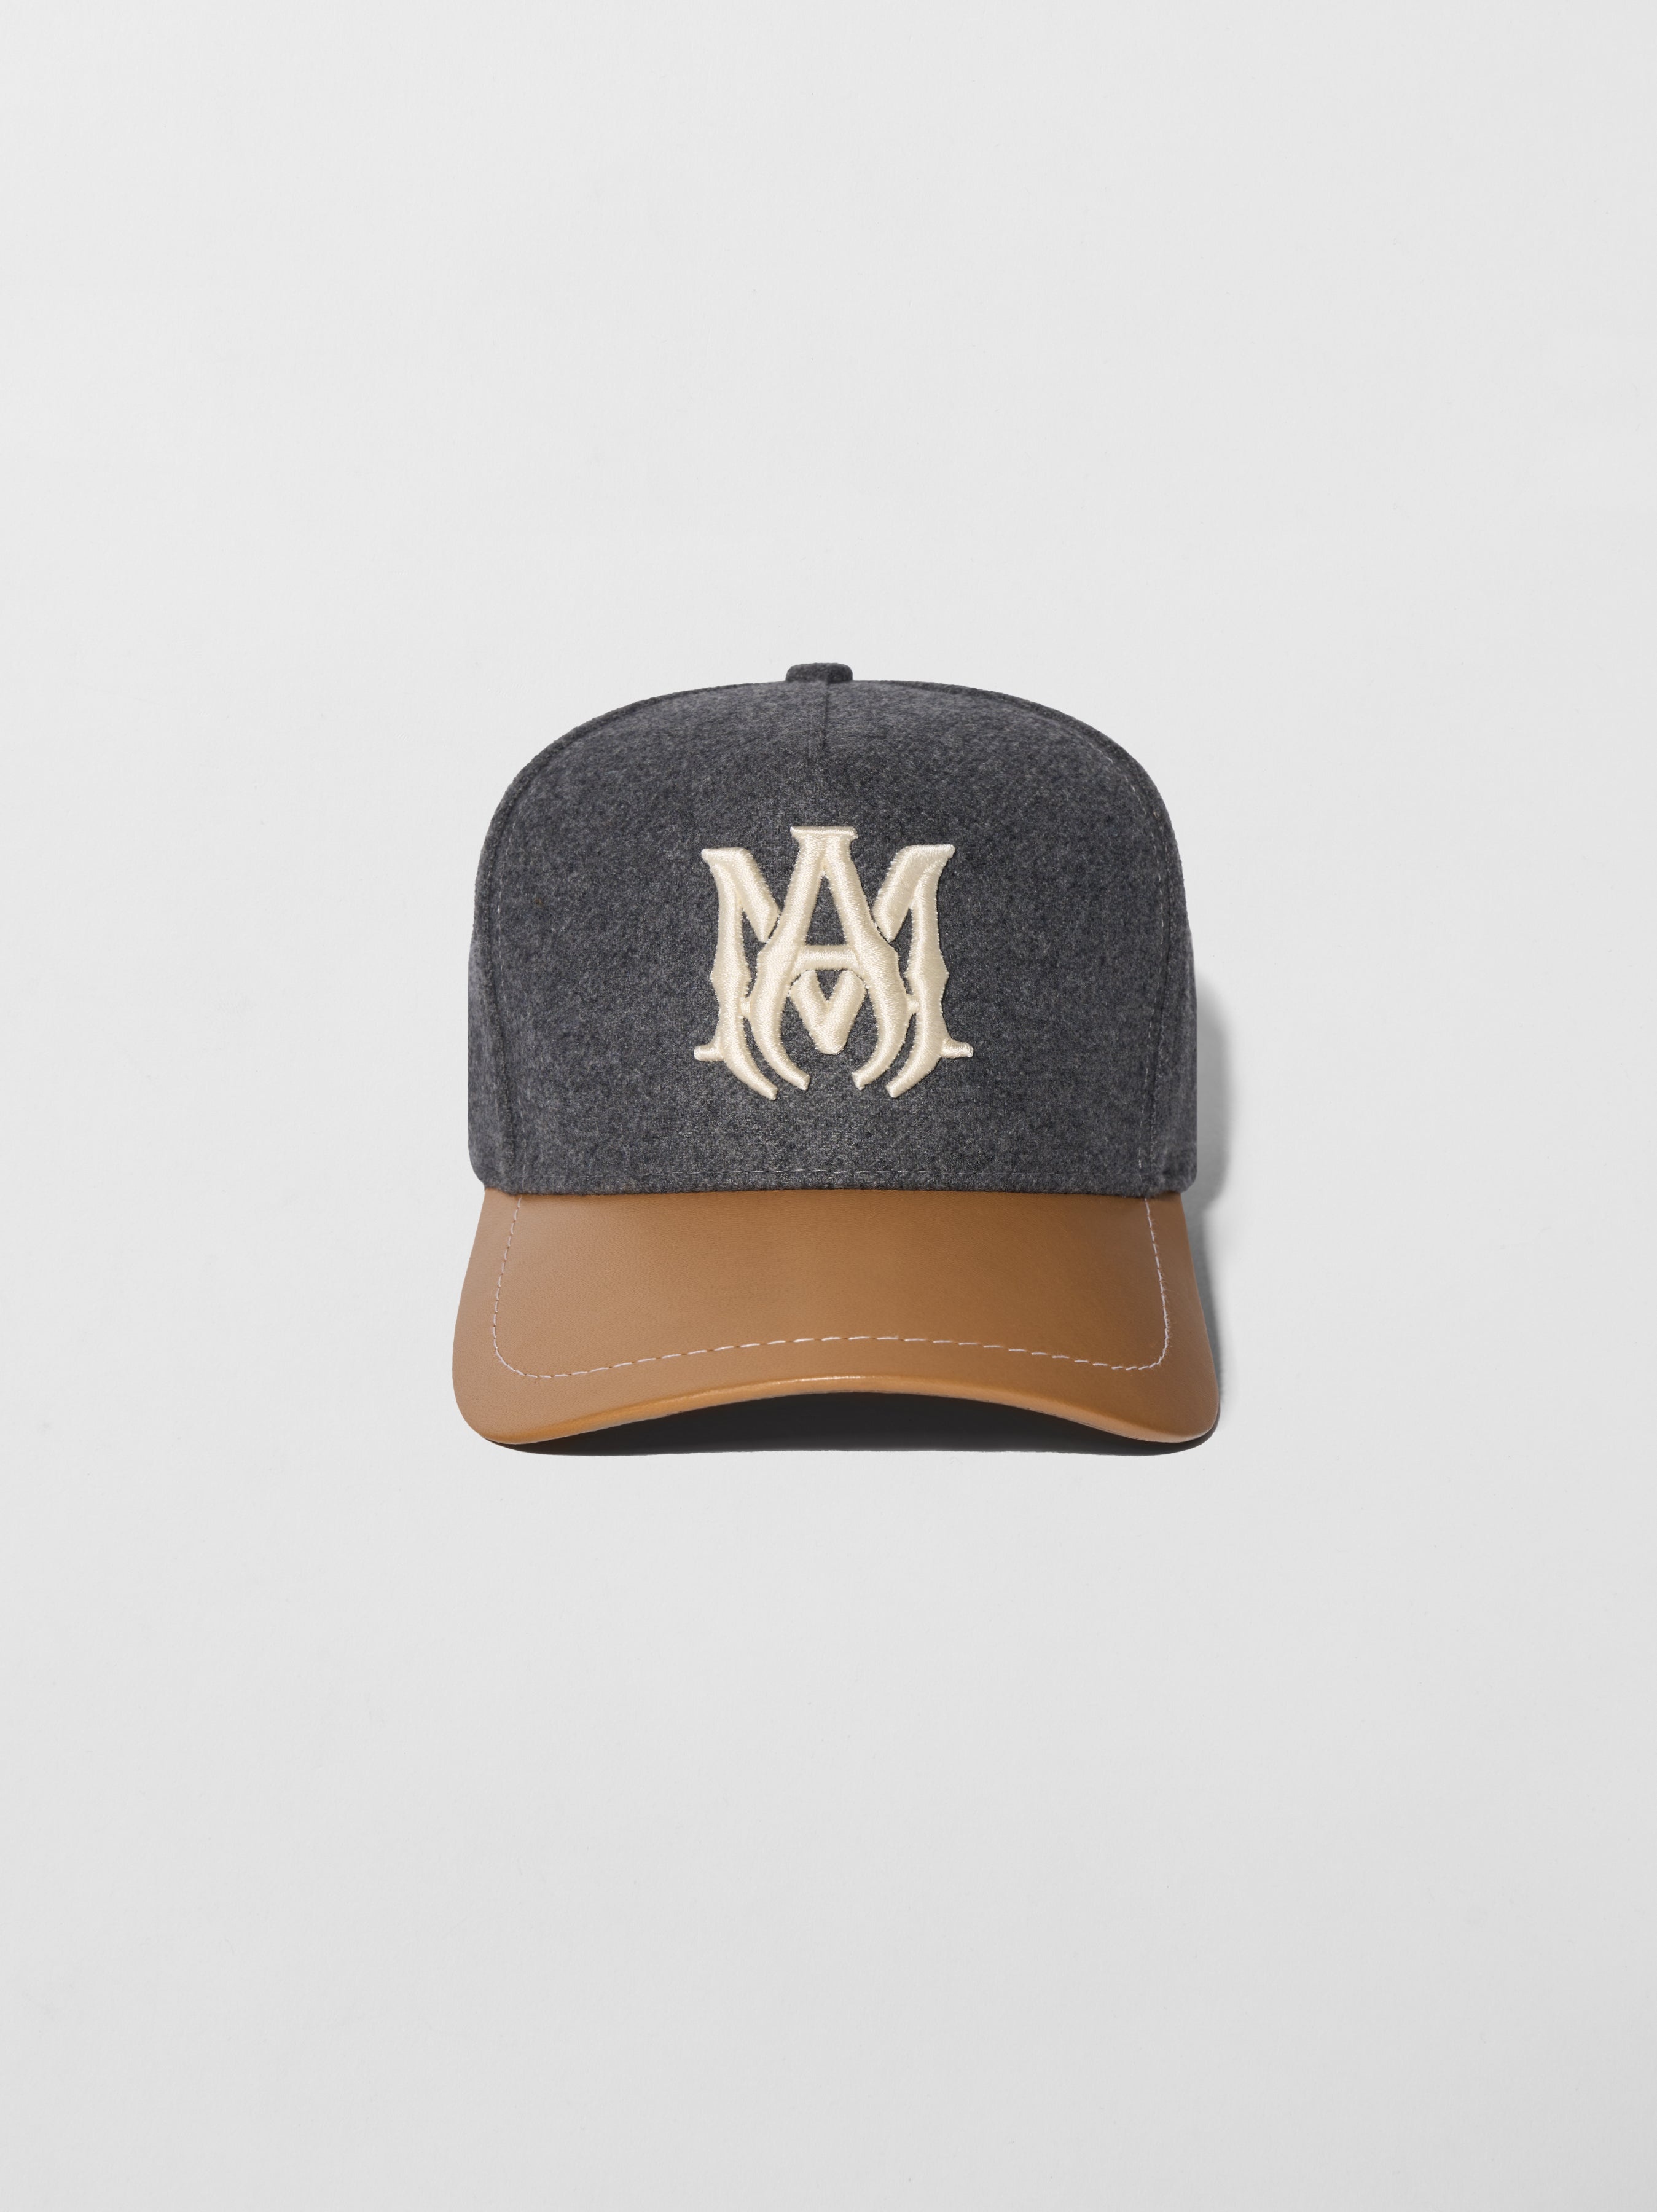 WOOL/LEATHER MA HAT - 1